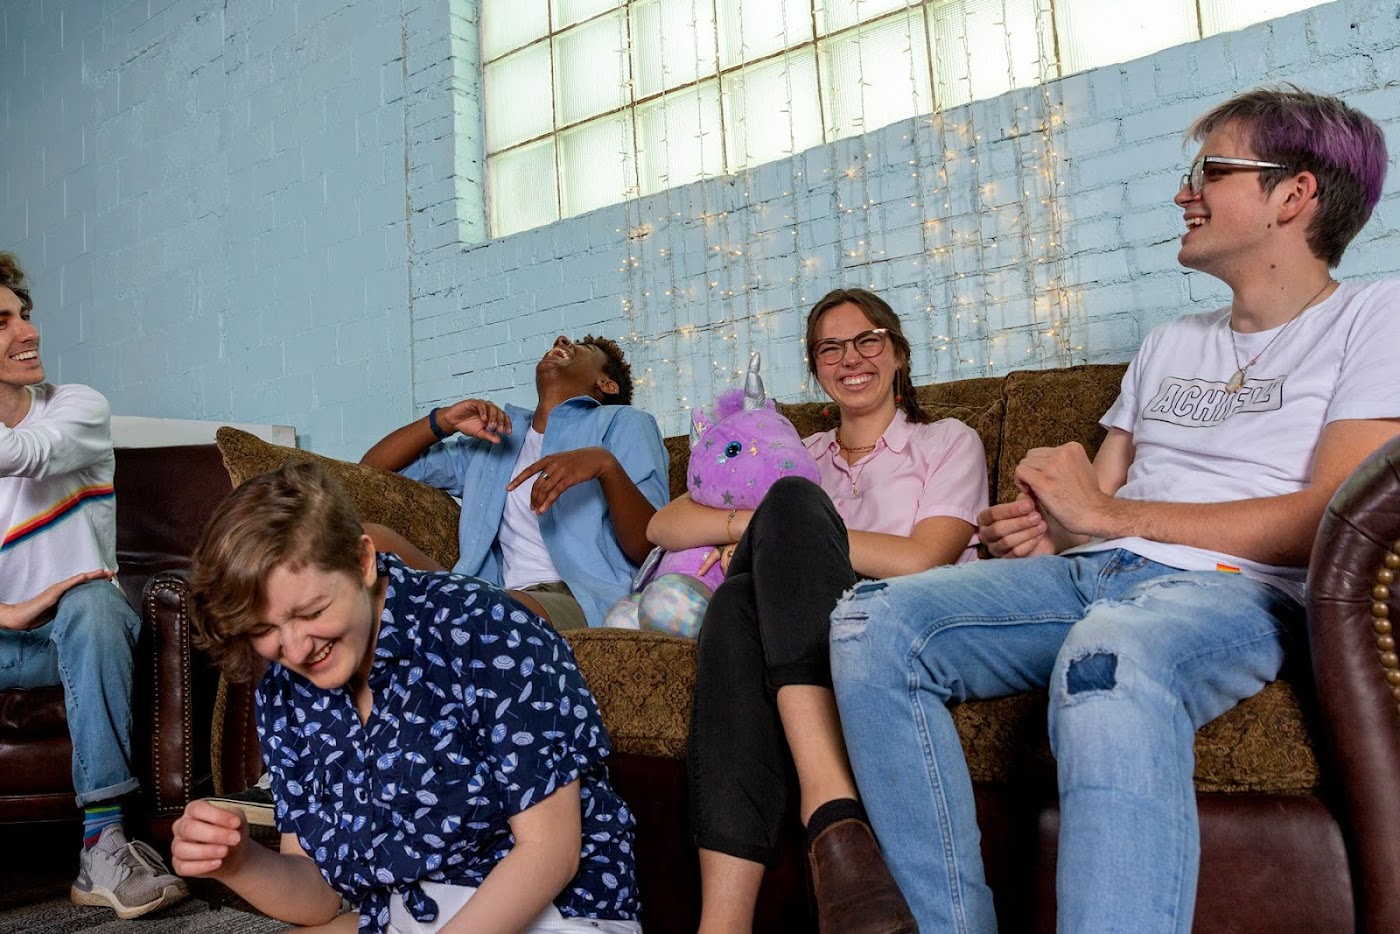 A group of younger queer people sit on a couch inside.